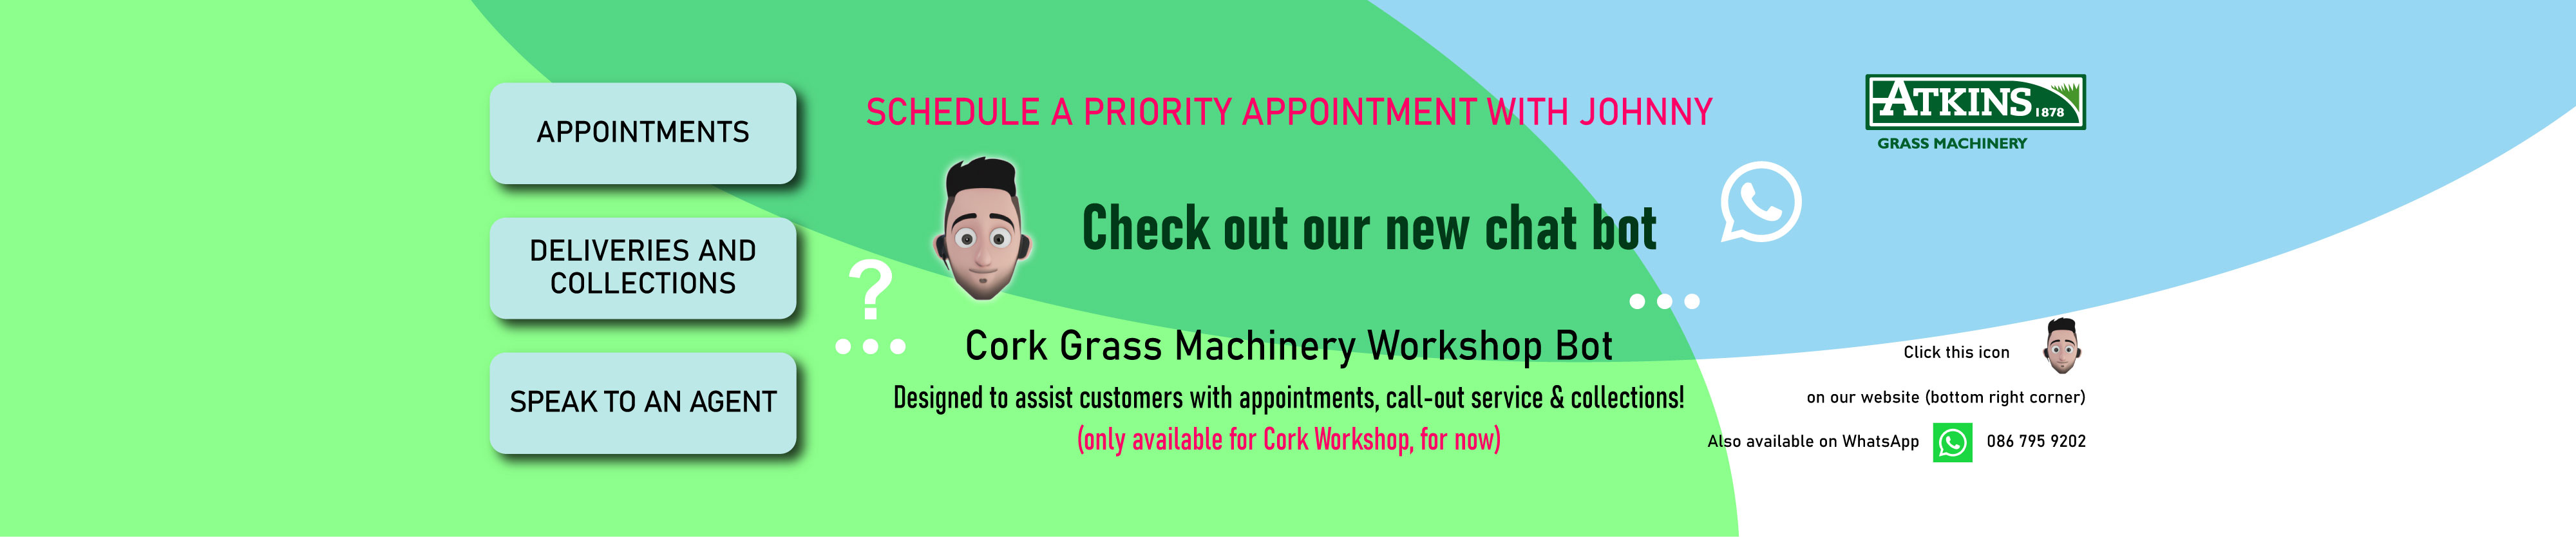 Grass Machinery Booking System